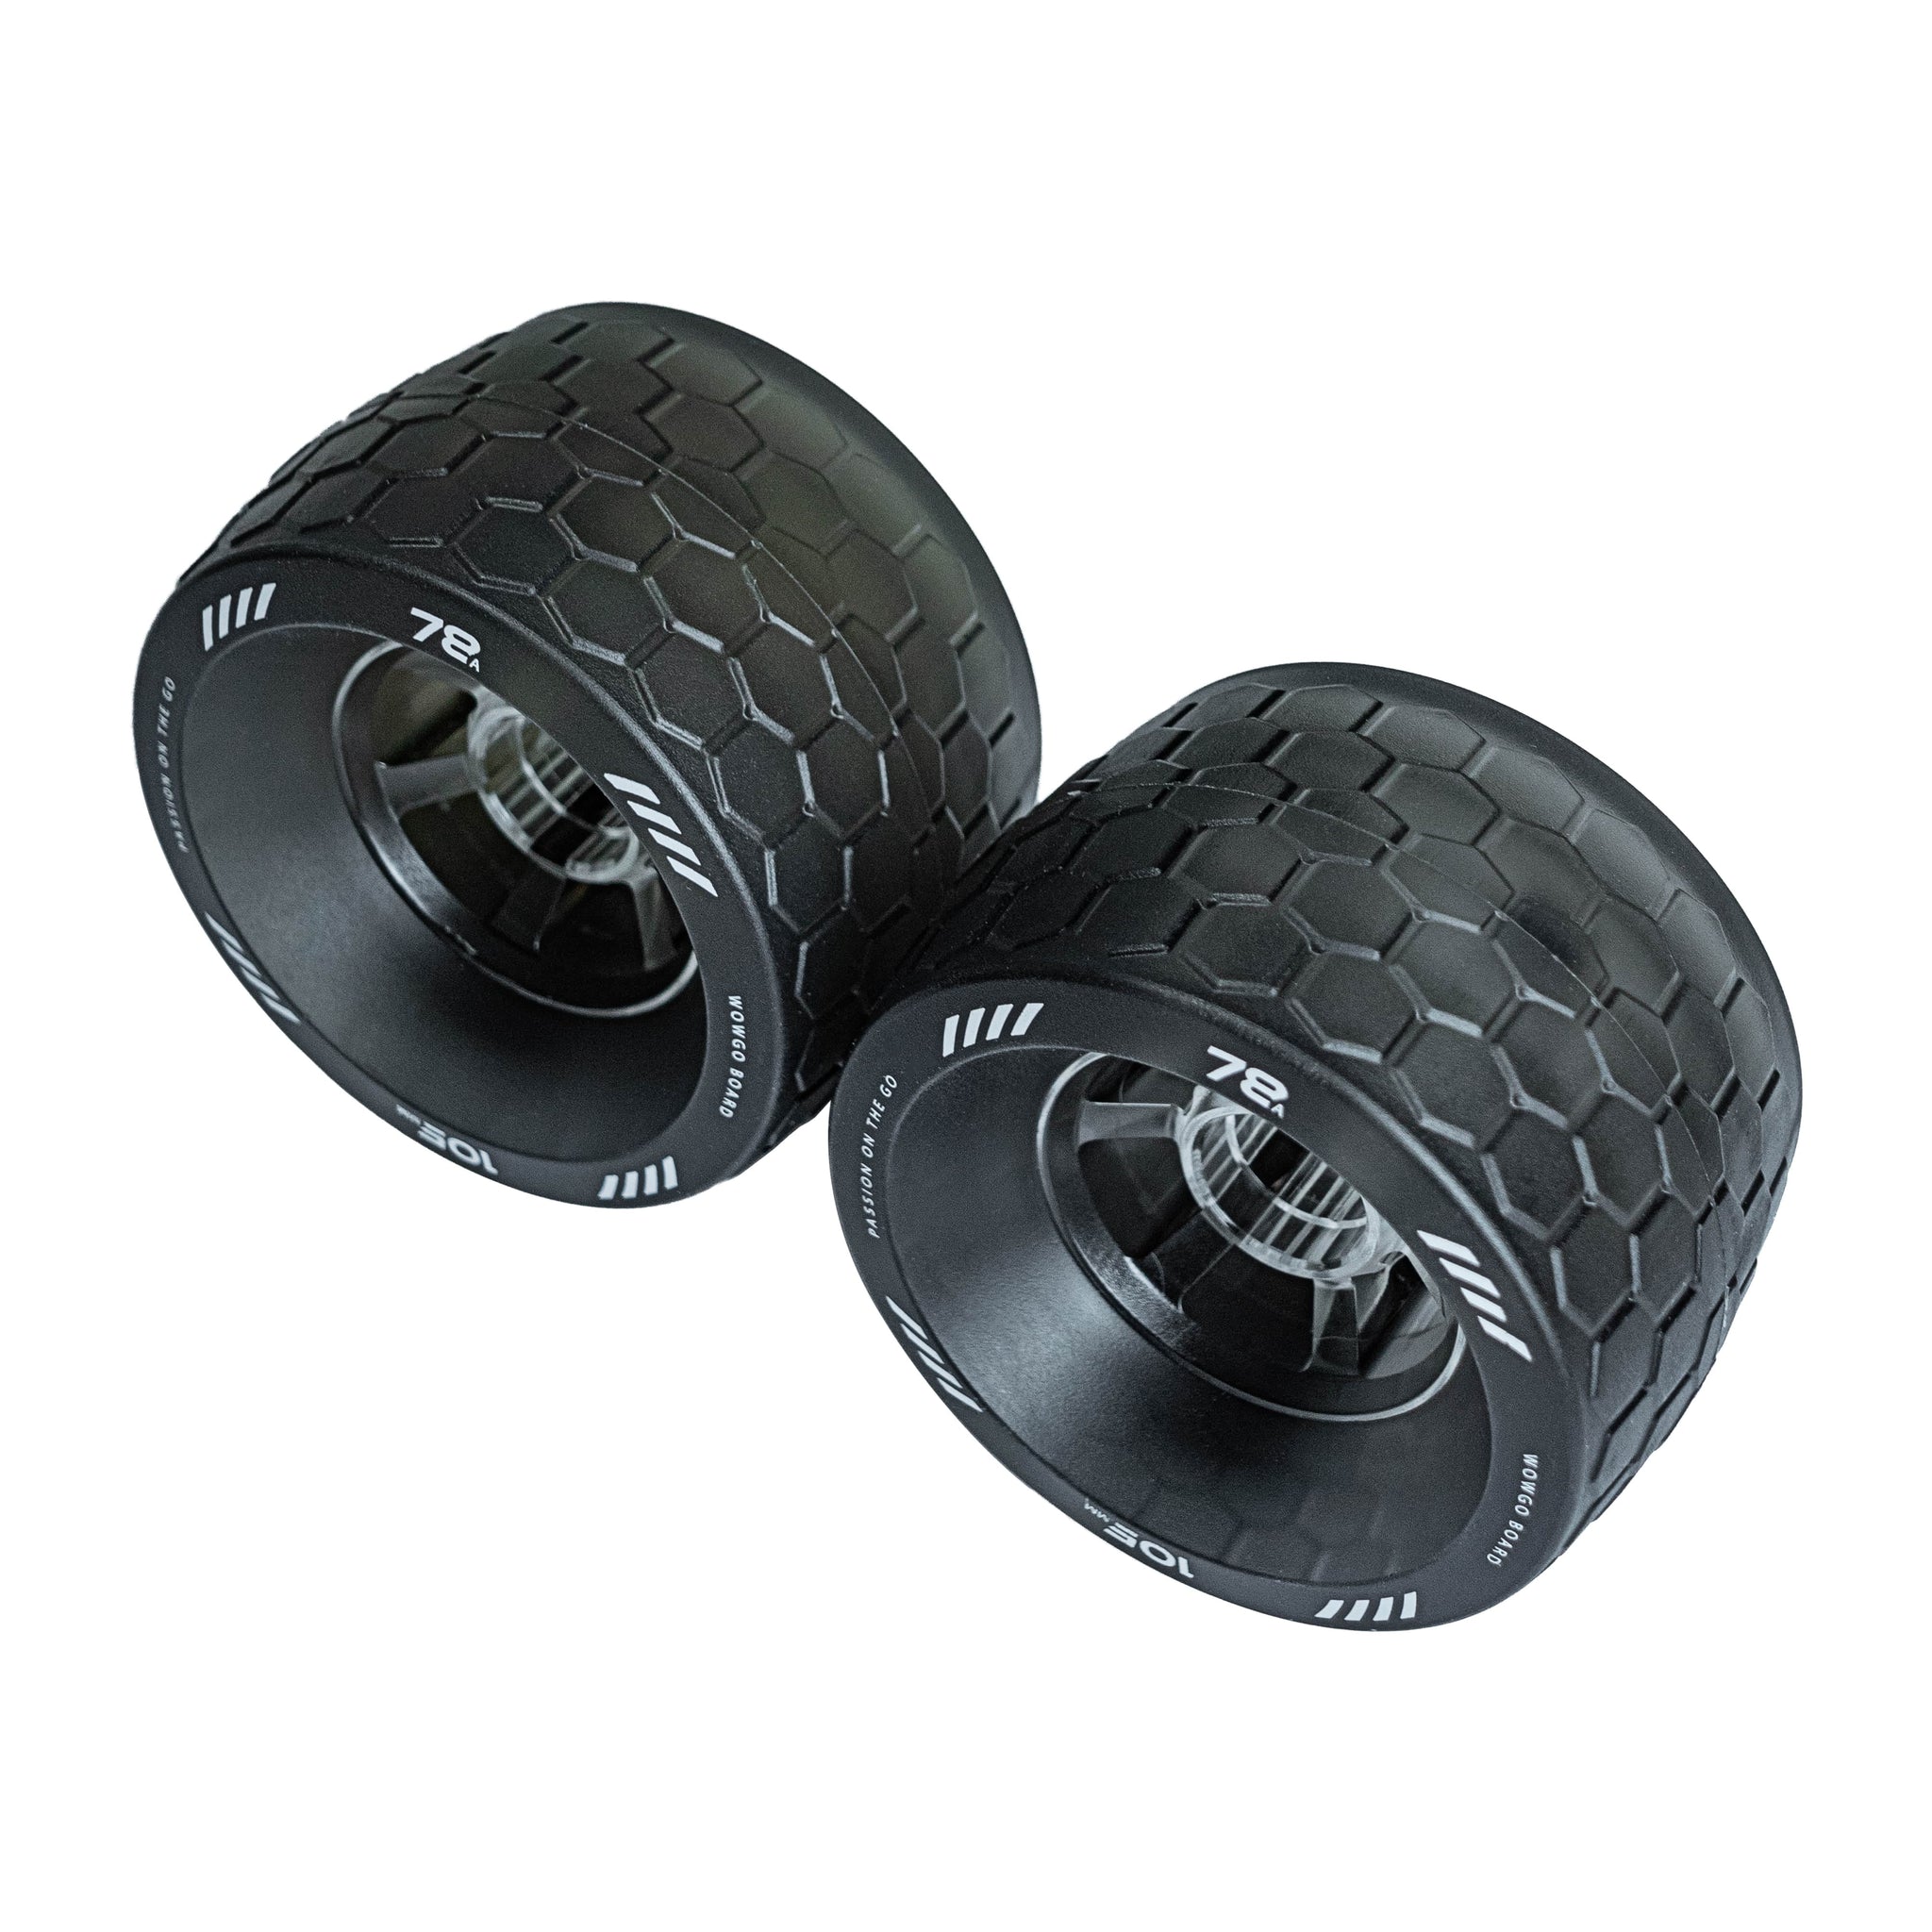 Wowgo Honeycomb Wheels for 2S Pro (105 mm) - WOWGO BOARD